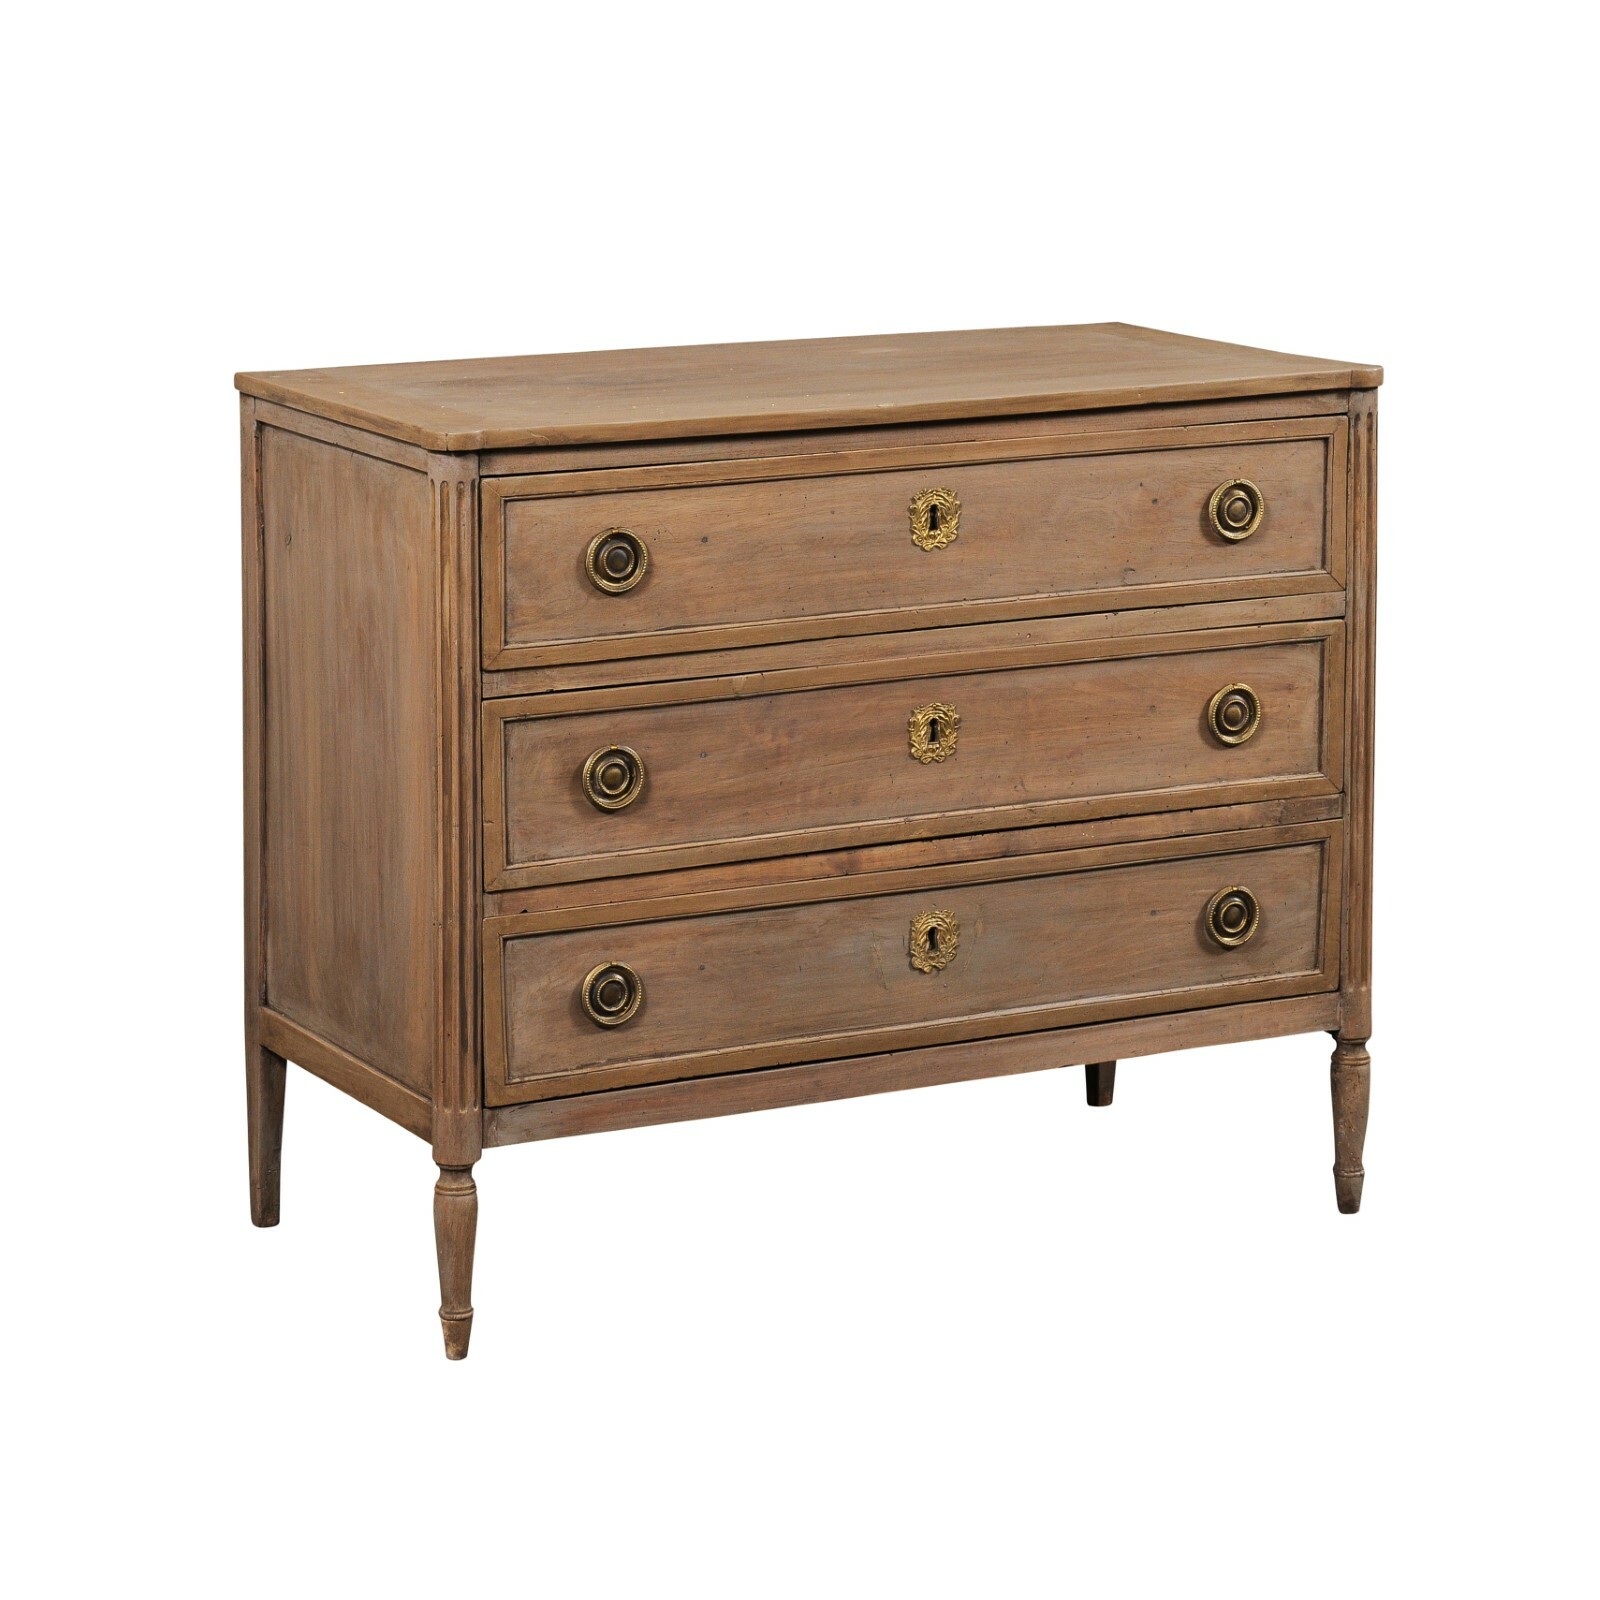 French Neoclassical 3-Drawer Commode,19th C